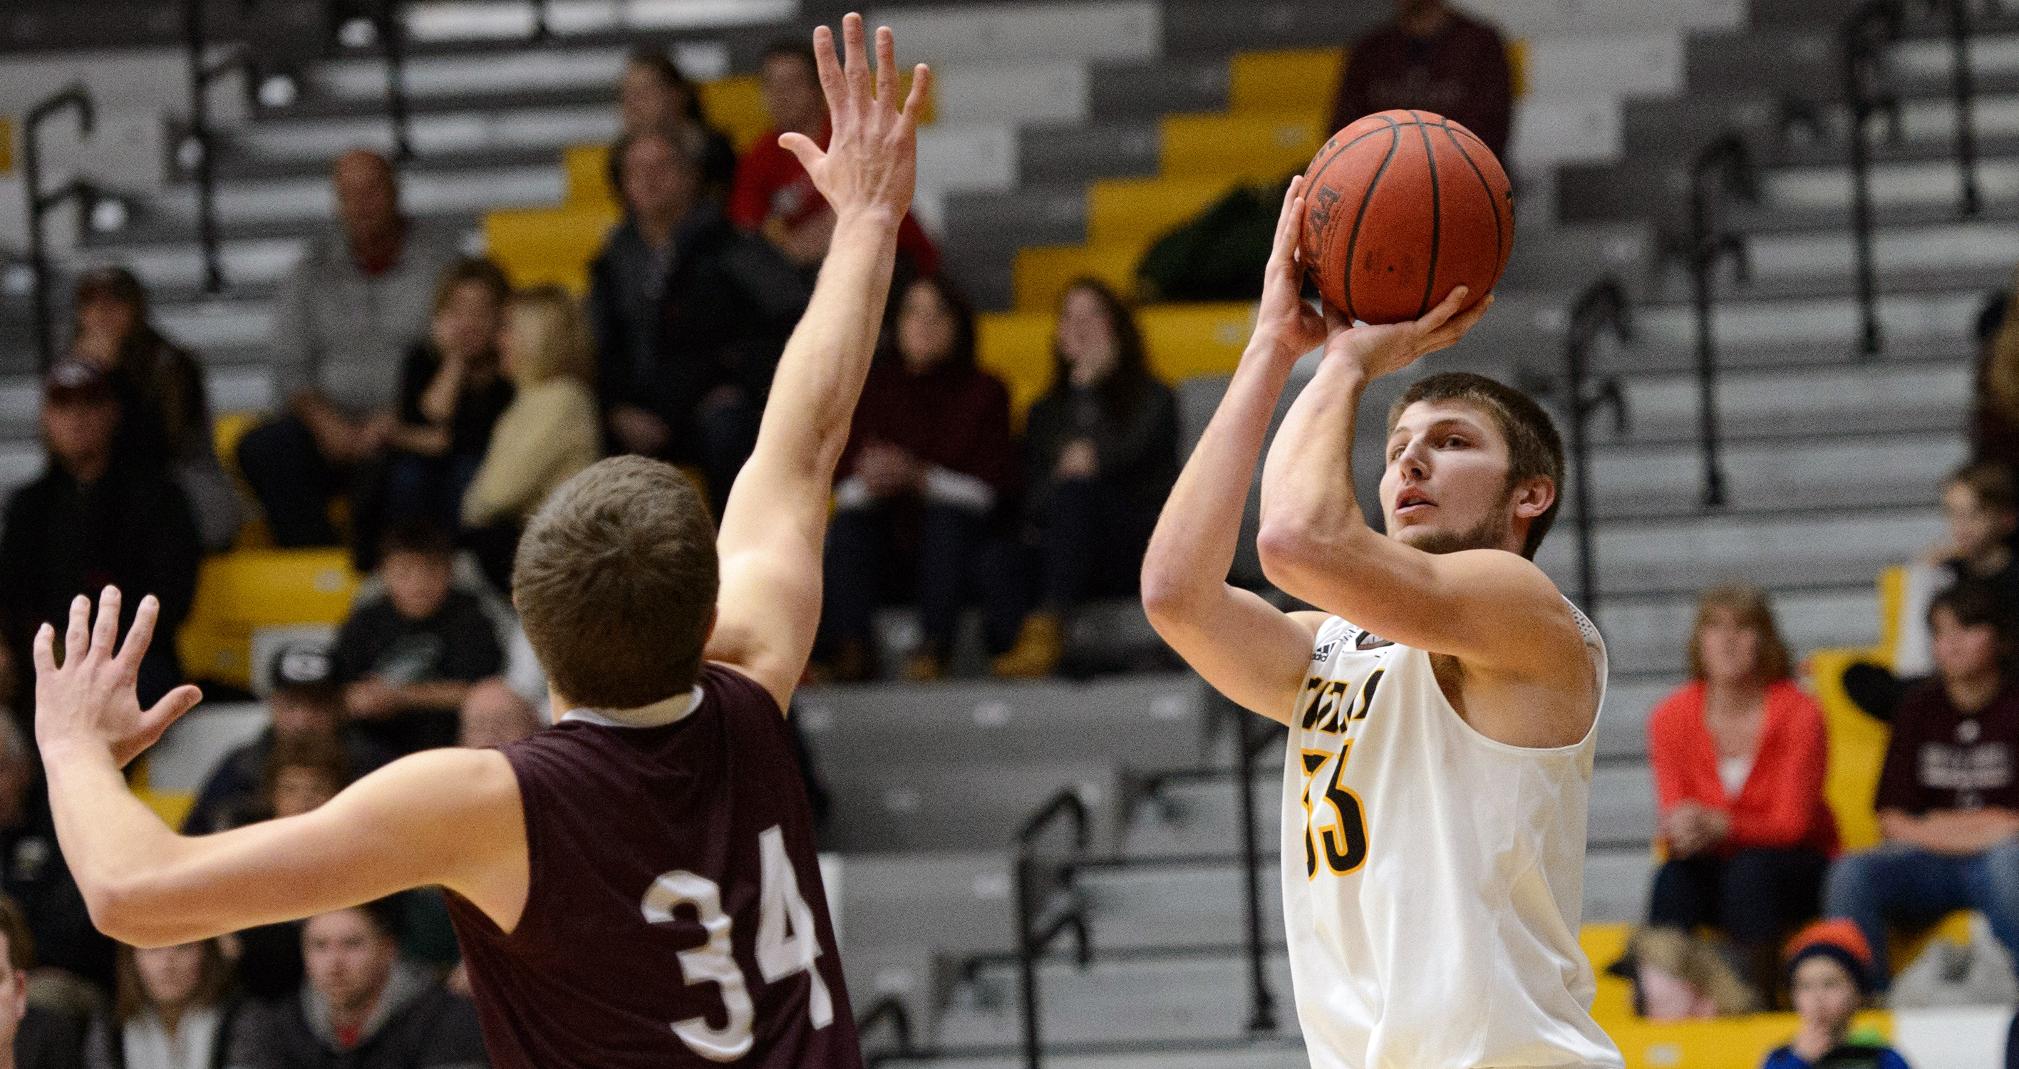 Max Schebel connected on both of his shots while grabbing five rebounds against the Pointers.